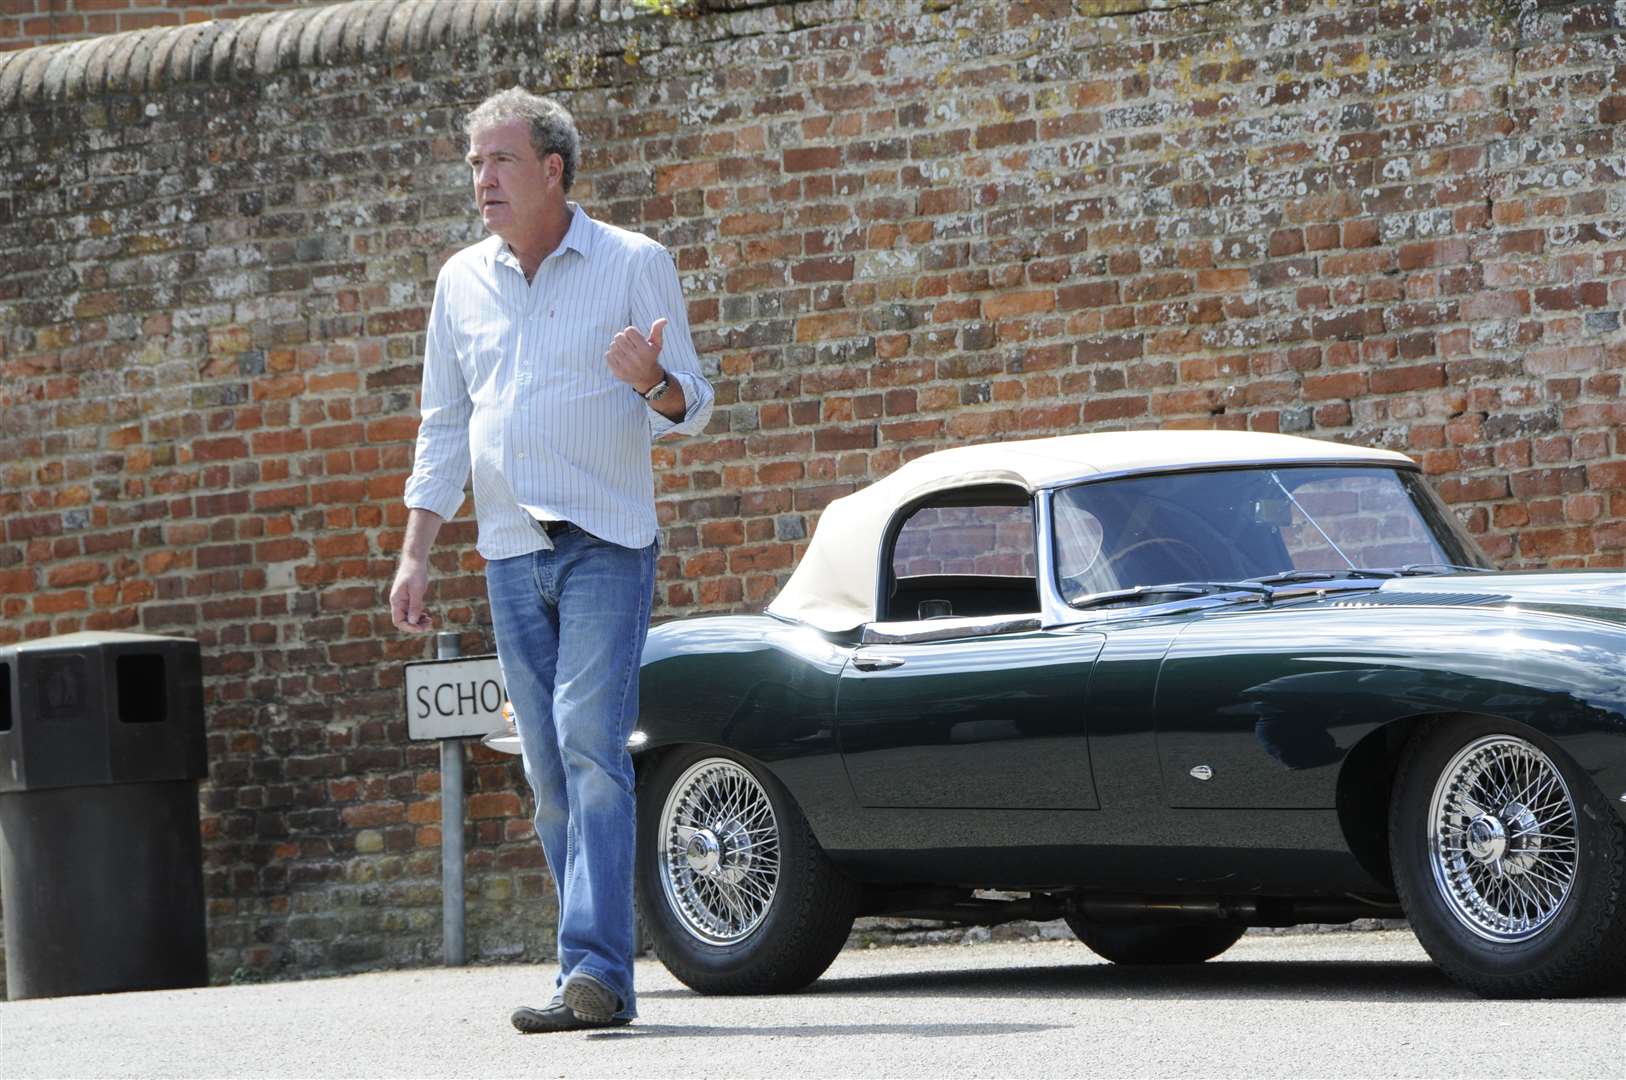 Chilham Square Top Gear Filming,Presenter Jeremy Clarkson doing an E Type special. Picture: Paul Amos